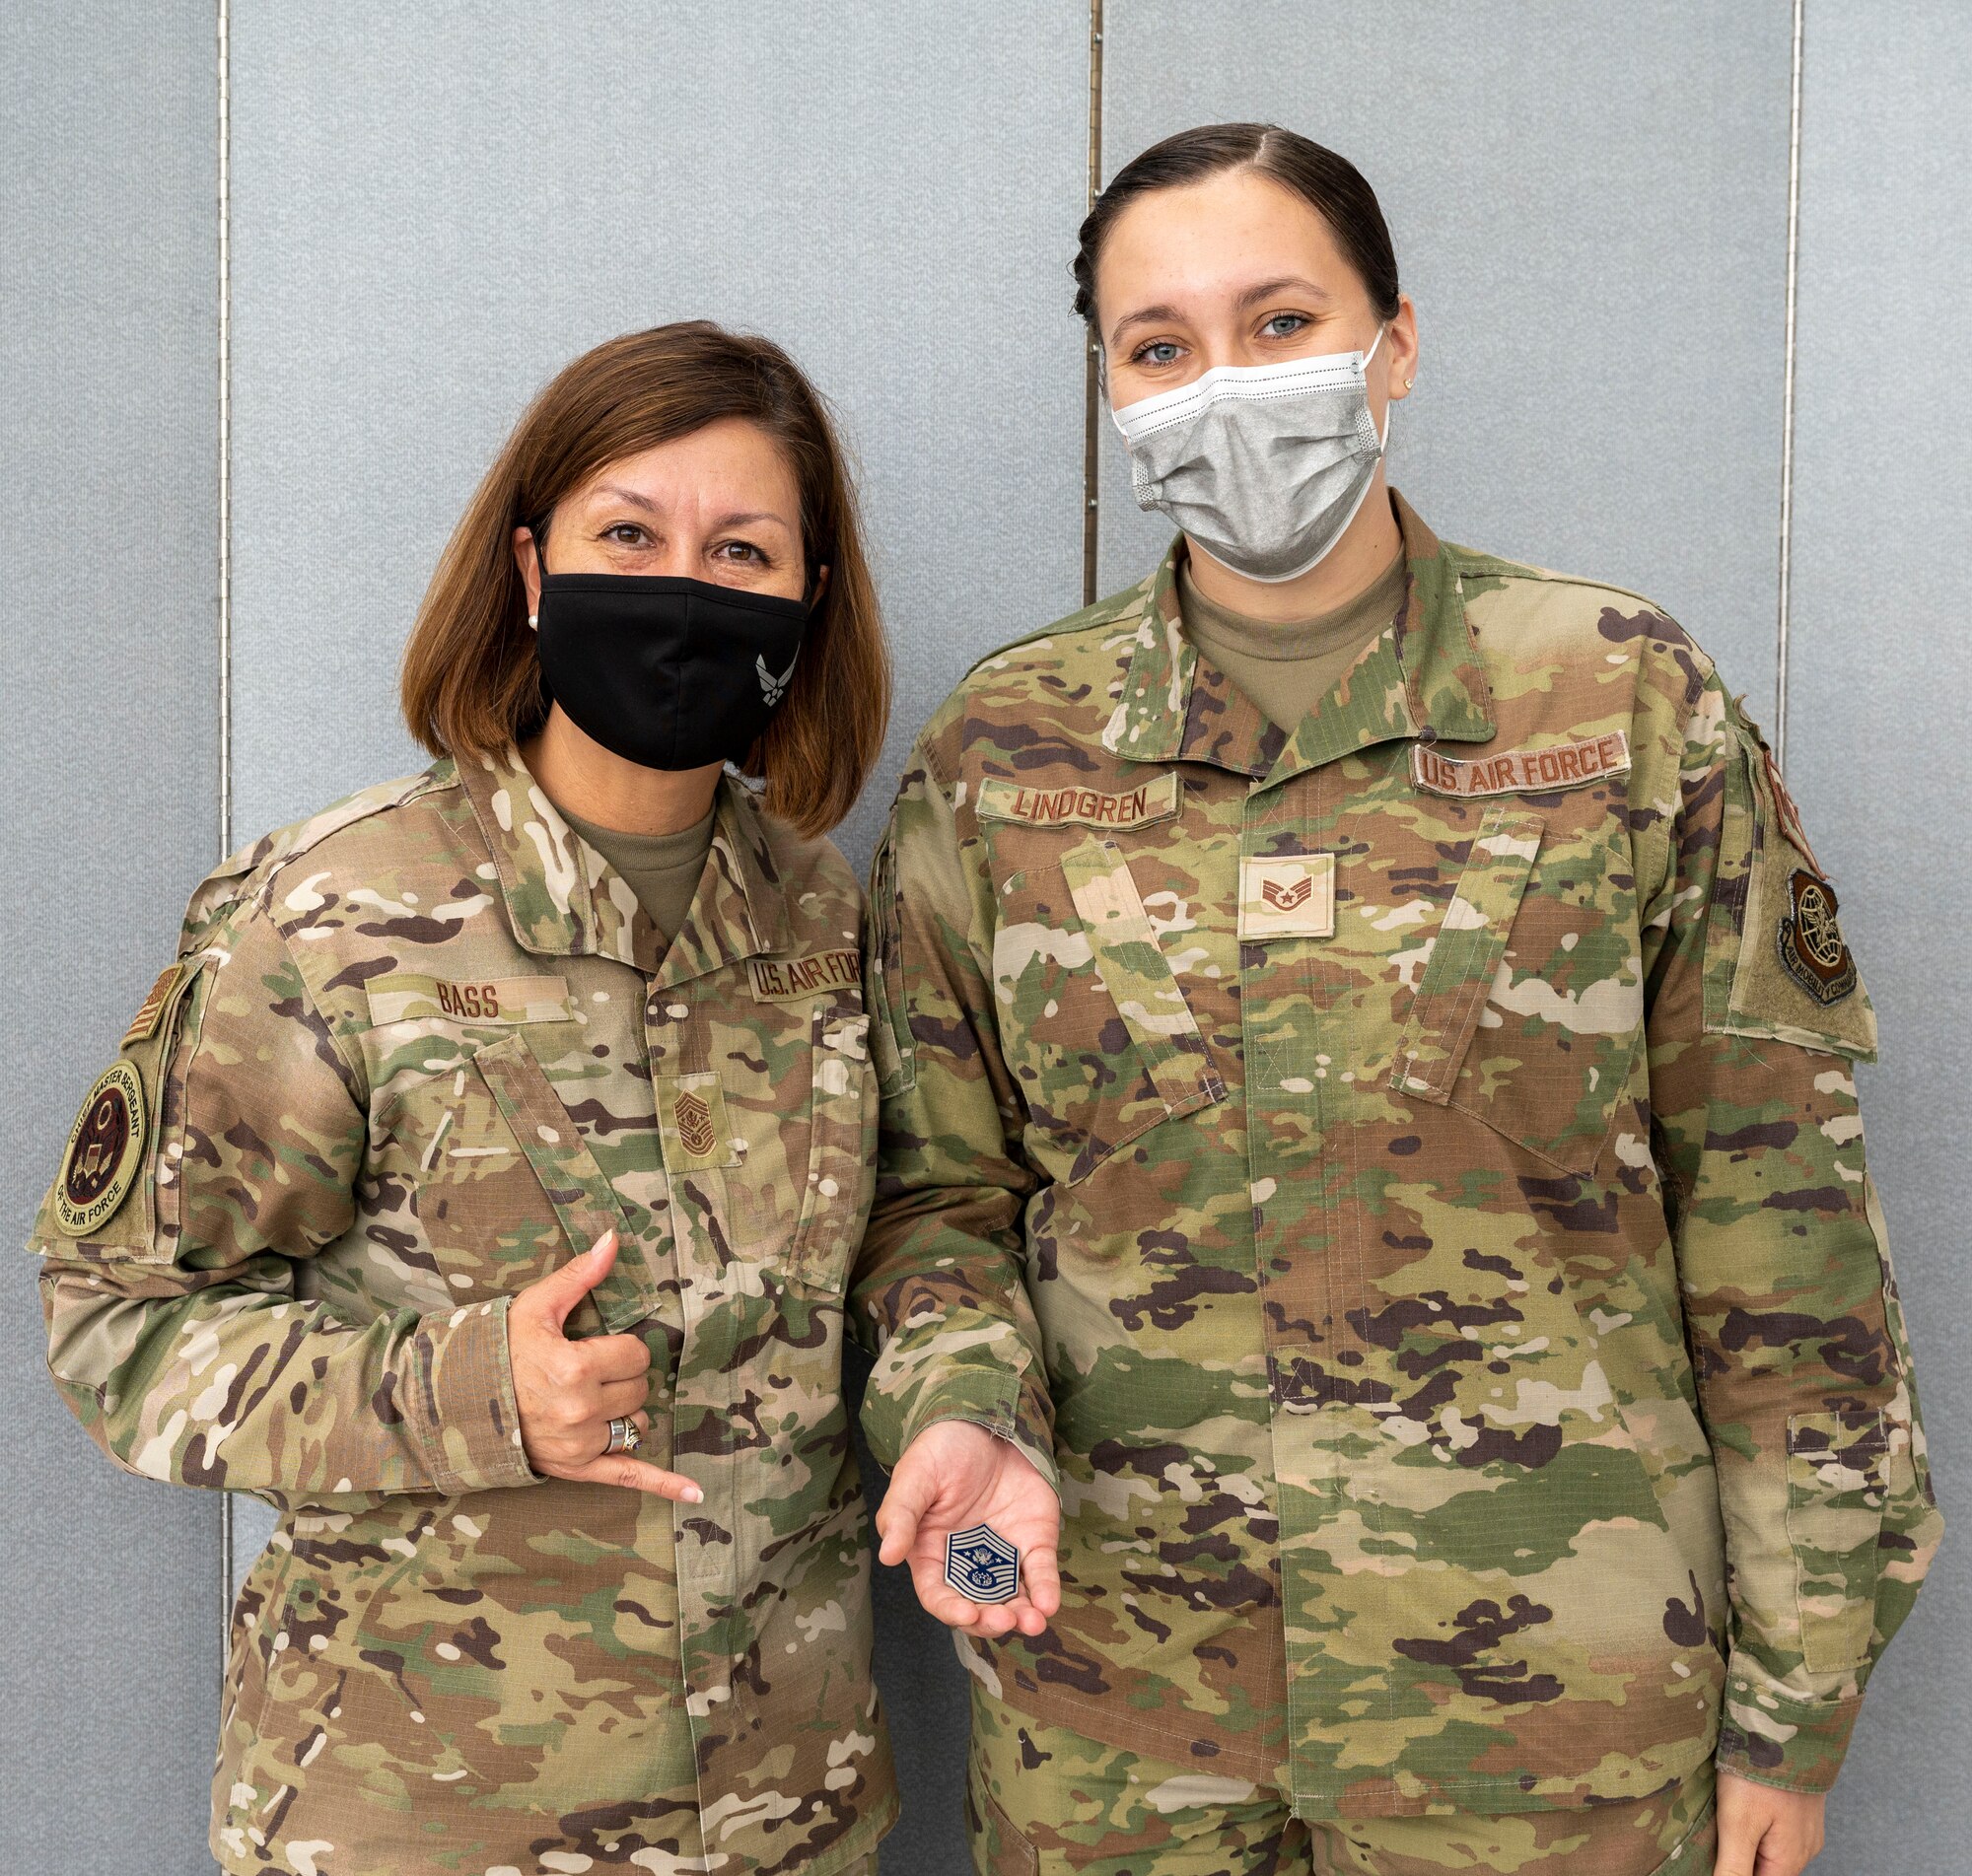 Chief Master Sgt. of the Air Force JoAnne S. Bass coins Staff Sgt. Karley Lindgren, 87th Operational Medical Readiness Squadron flight and operations medical technician, at the Patriot Express COVID-19 testing facility in the Baltimore/Washington International Thurgood Marshall Airport in Baltimore, July 8, 2021. The site provides on-site, rapid COVID-19 testing for service members and their families traveling to overseas duty locations. Due to the increased availability in COVID-19 testing centers and vaccines, testing at the BWI facility is scheduled to discontinue July 15, 2021. (U.S. Air Force photo by Airman 1st Class Cydney Lee)